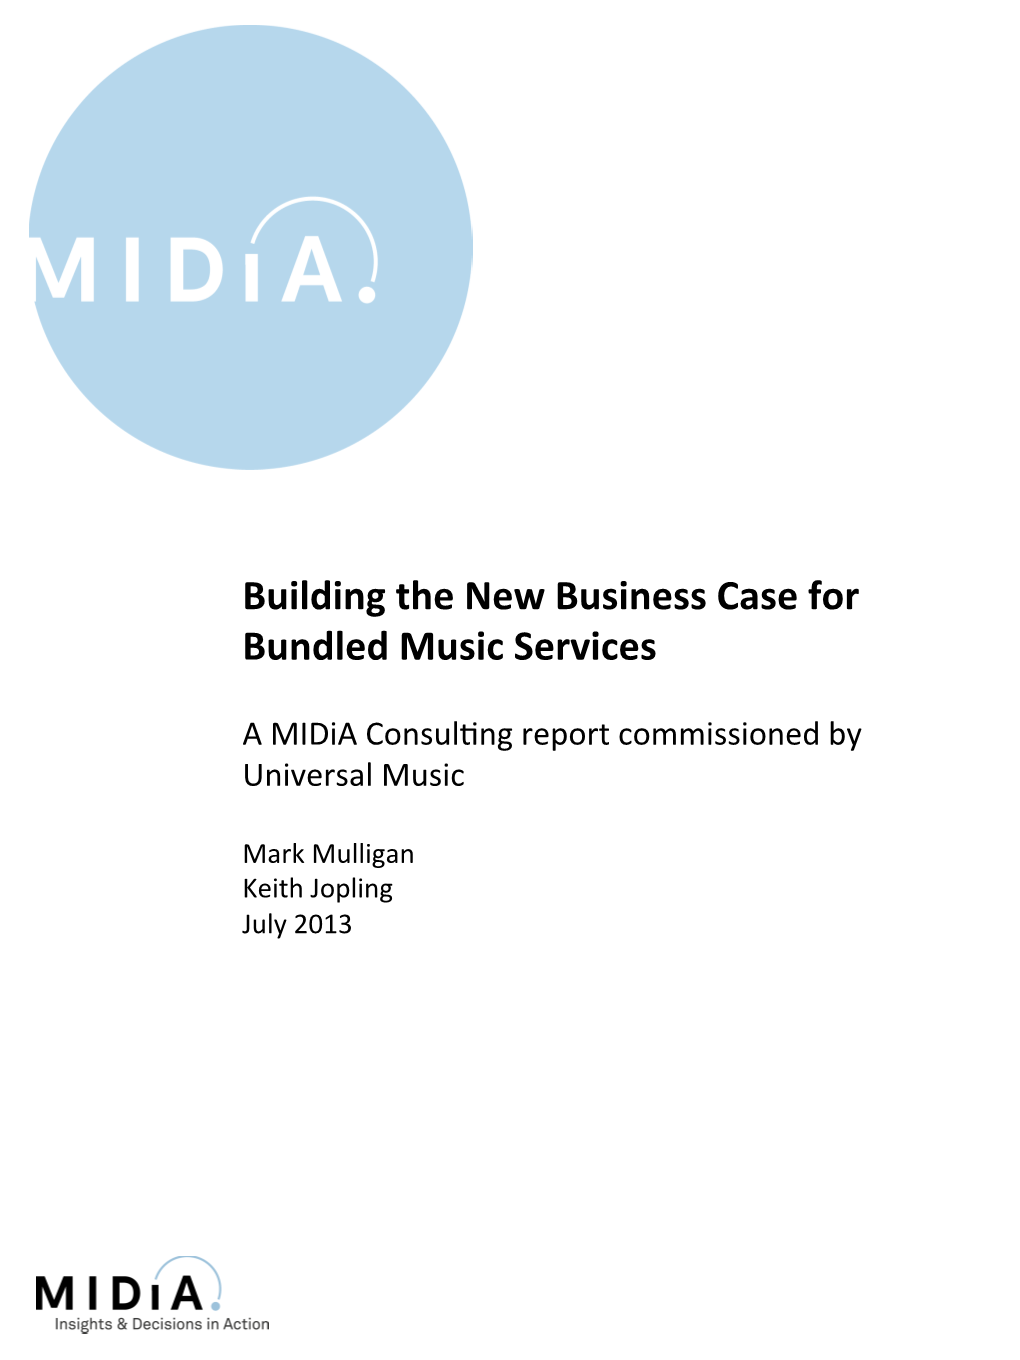 Building the New Business Case for Bundled Music Services – FULL